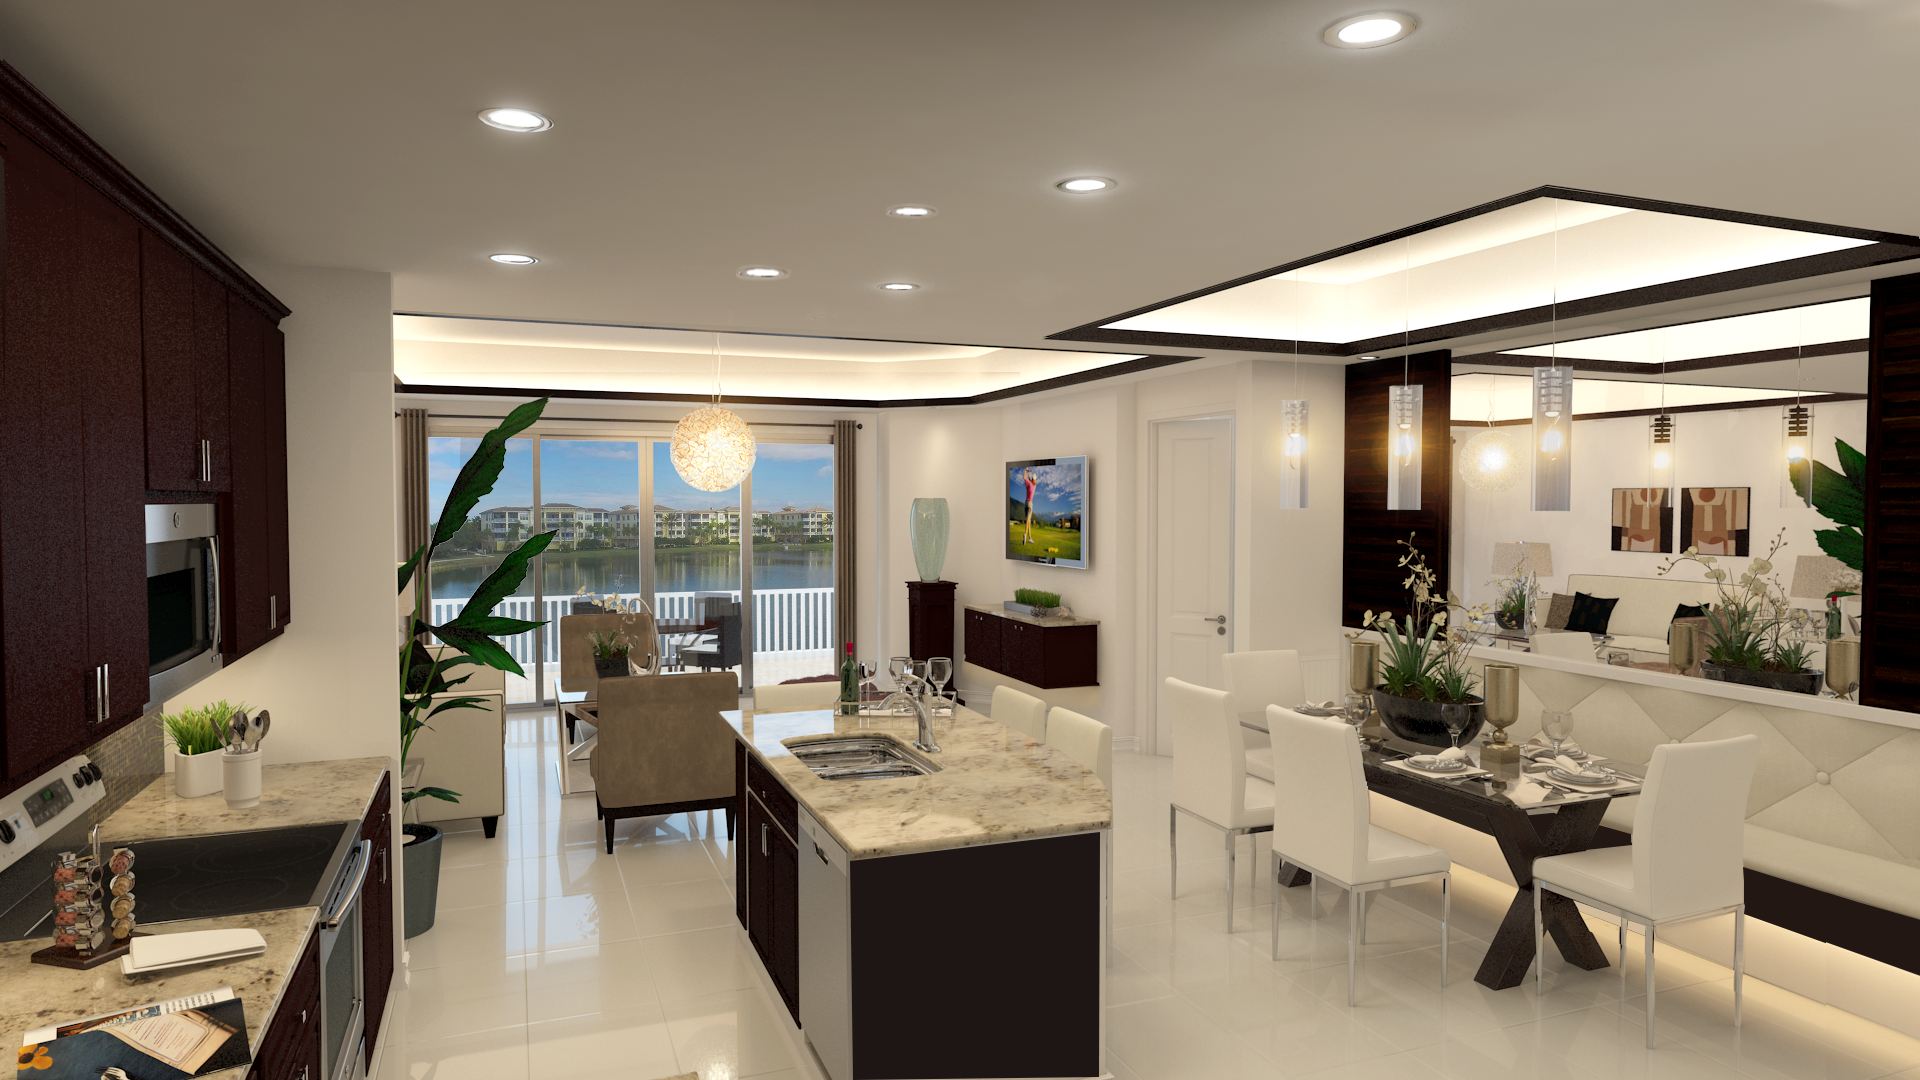 Although the Barbados model is under construction at Waterfront at Main Street, Tour of Homes visitors can visit the sales center and take a 3D virtual tour.